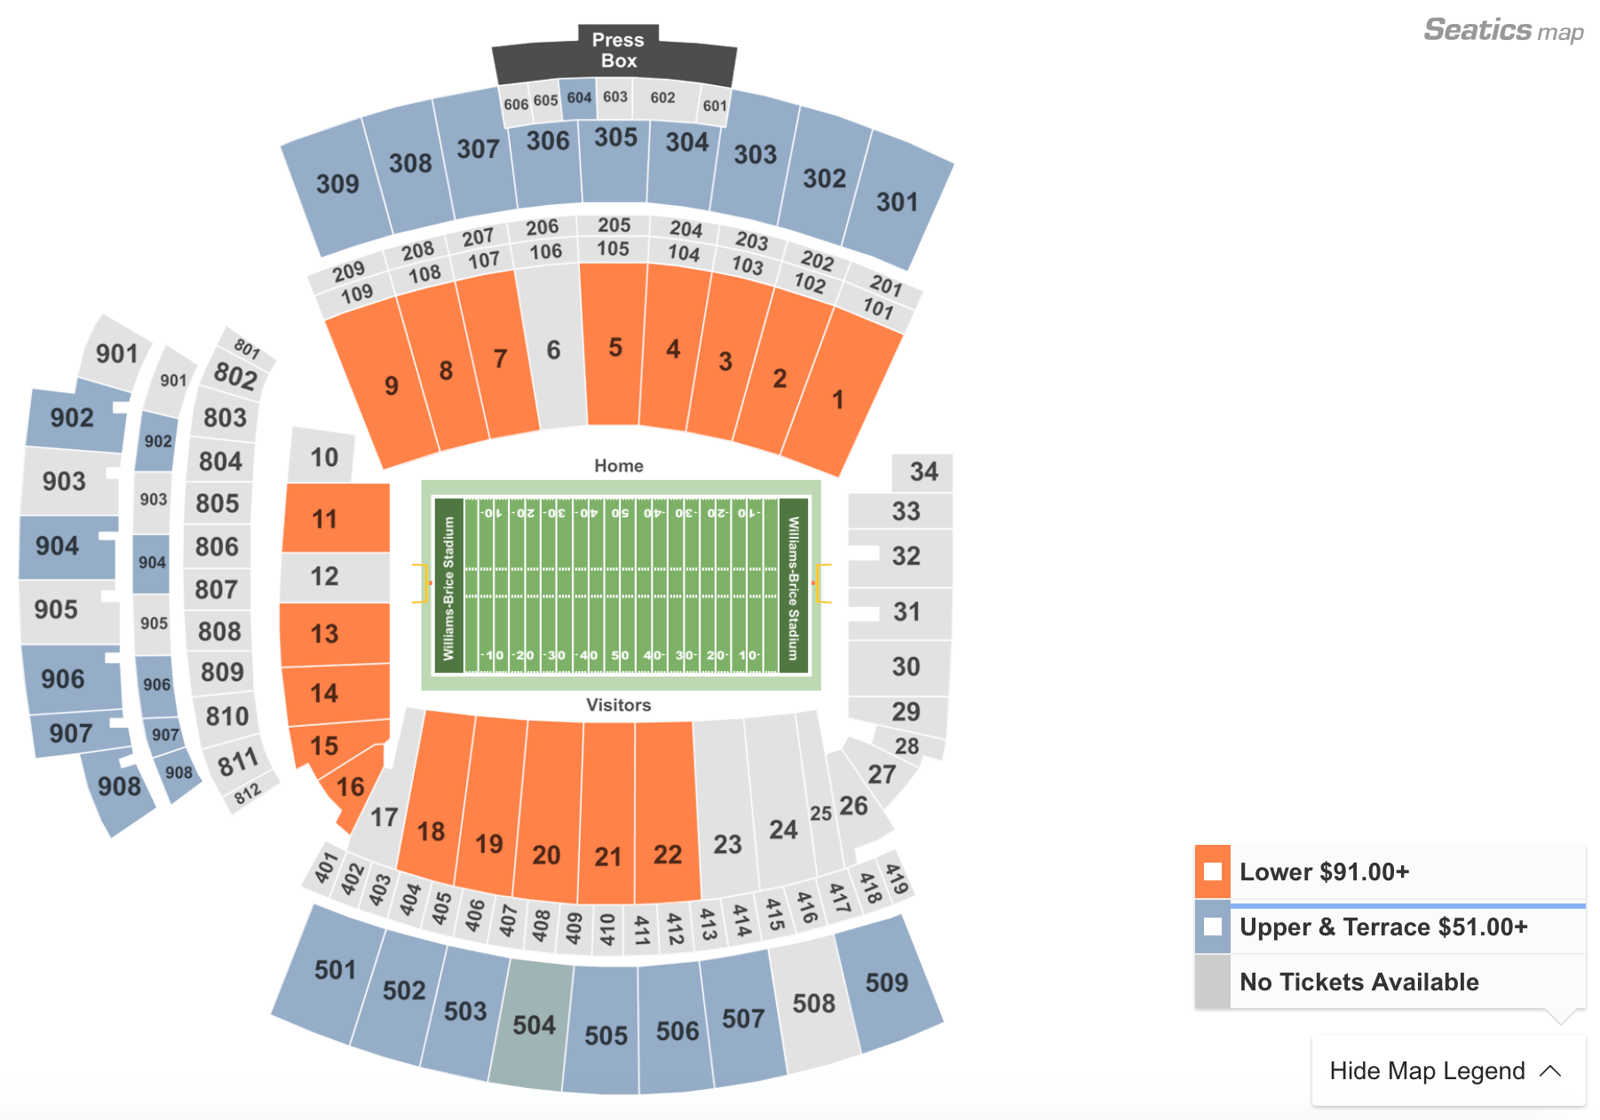 How To Find The Cheapest South Carolina vs. Clemson Football Tickets